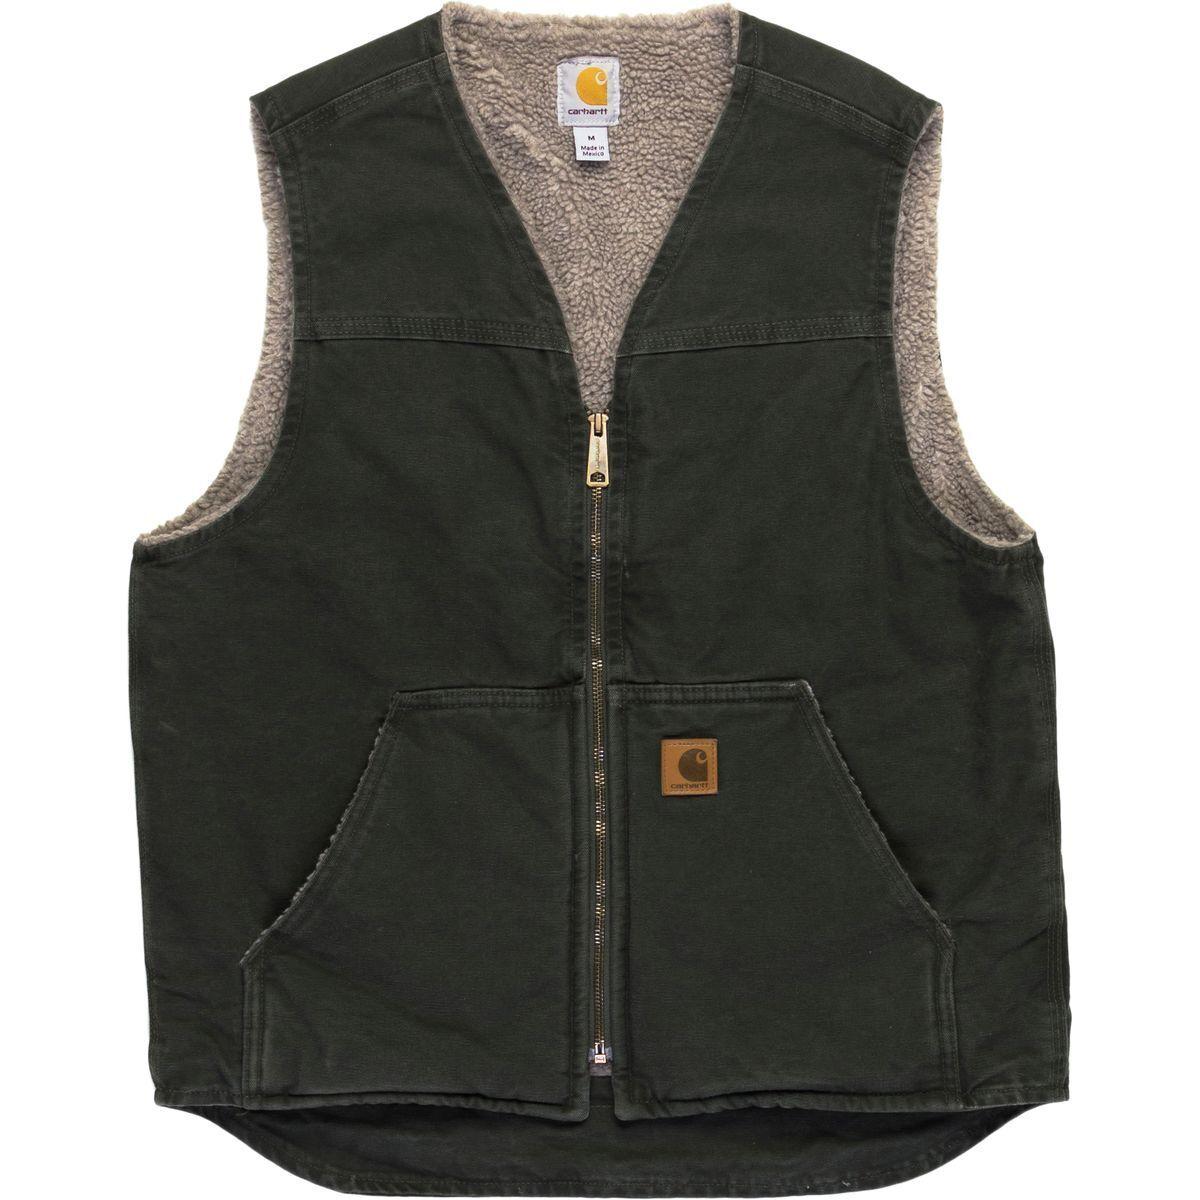 Carhartt Cotton Rugged Vest in Moss (Green) for Men - Lyst